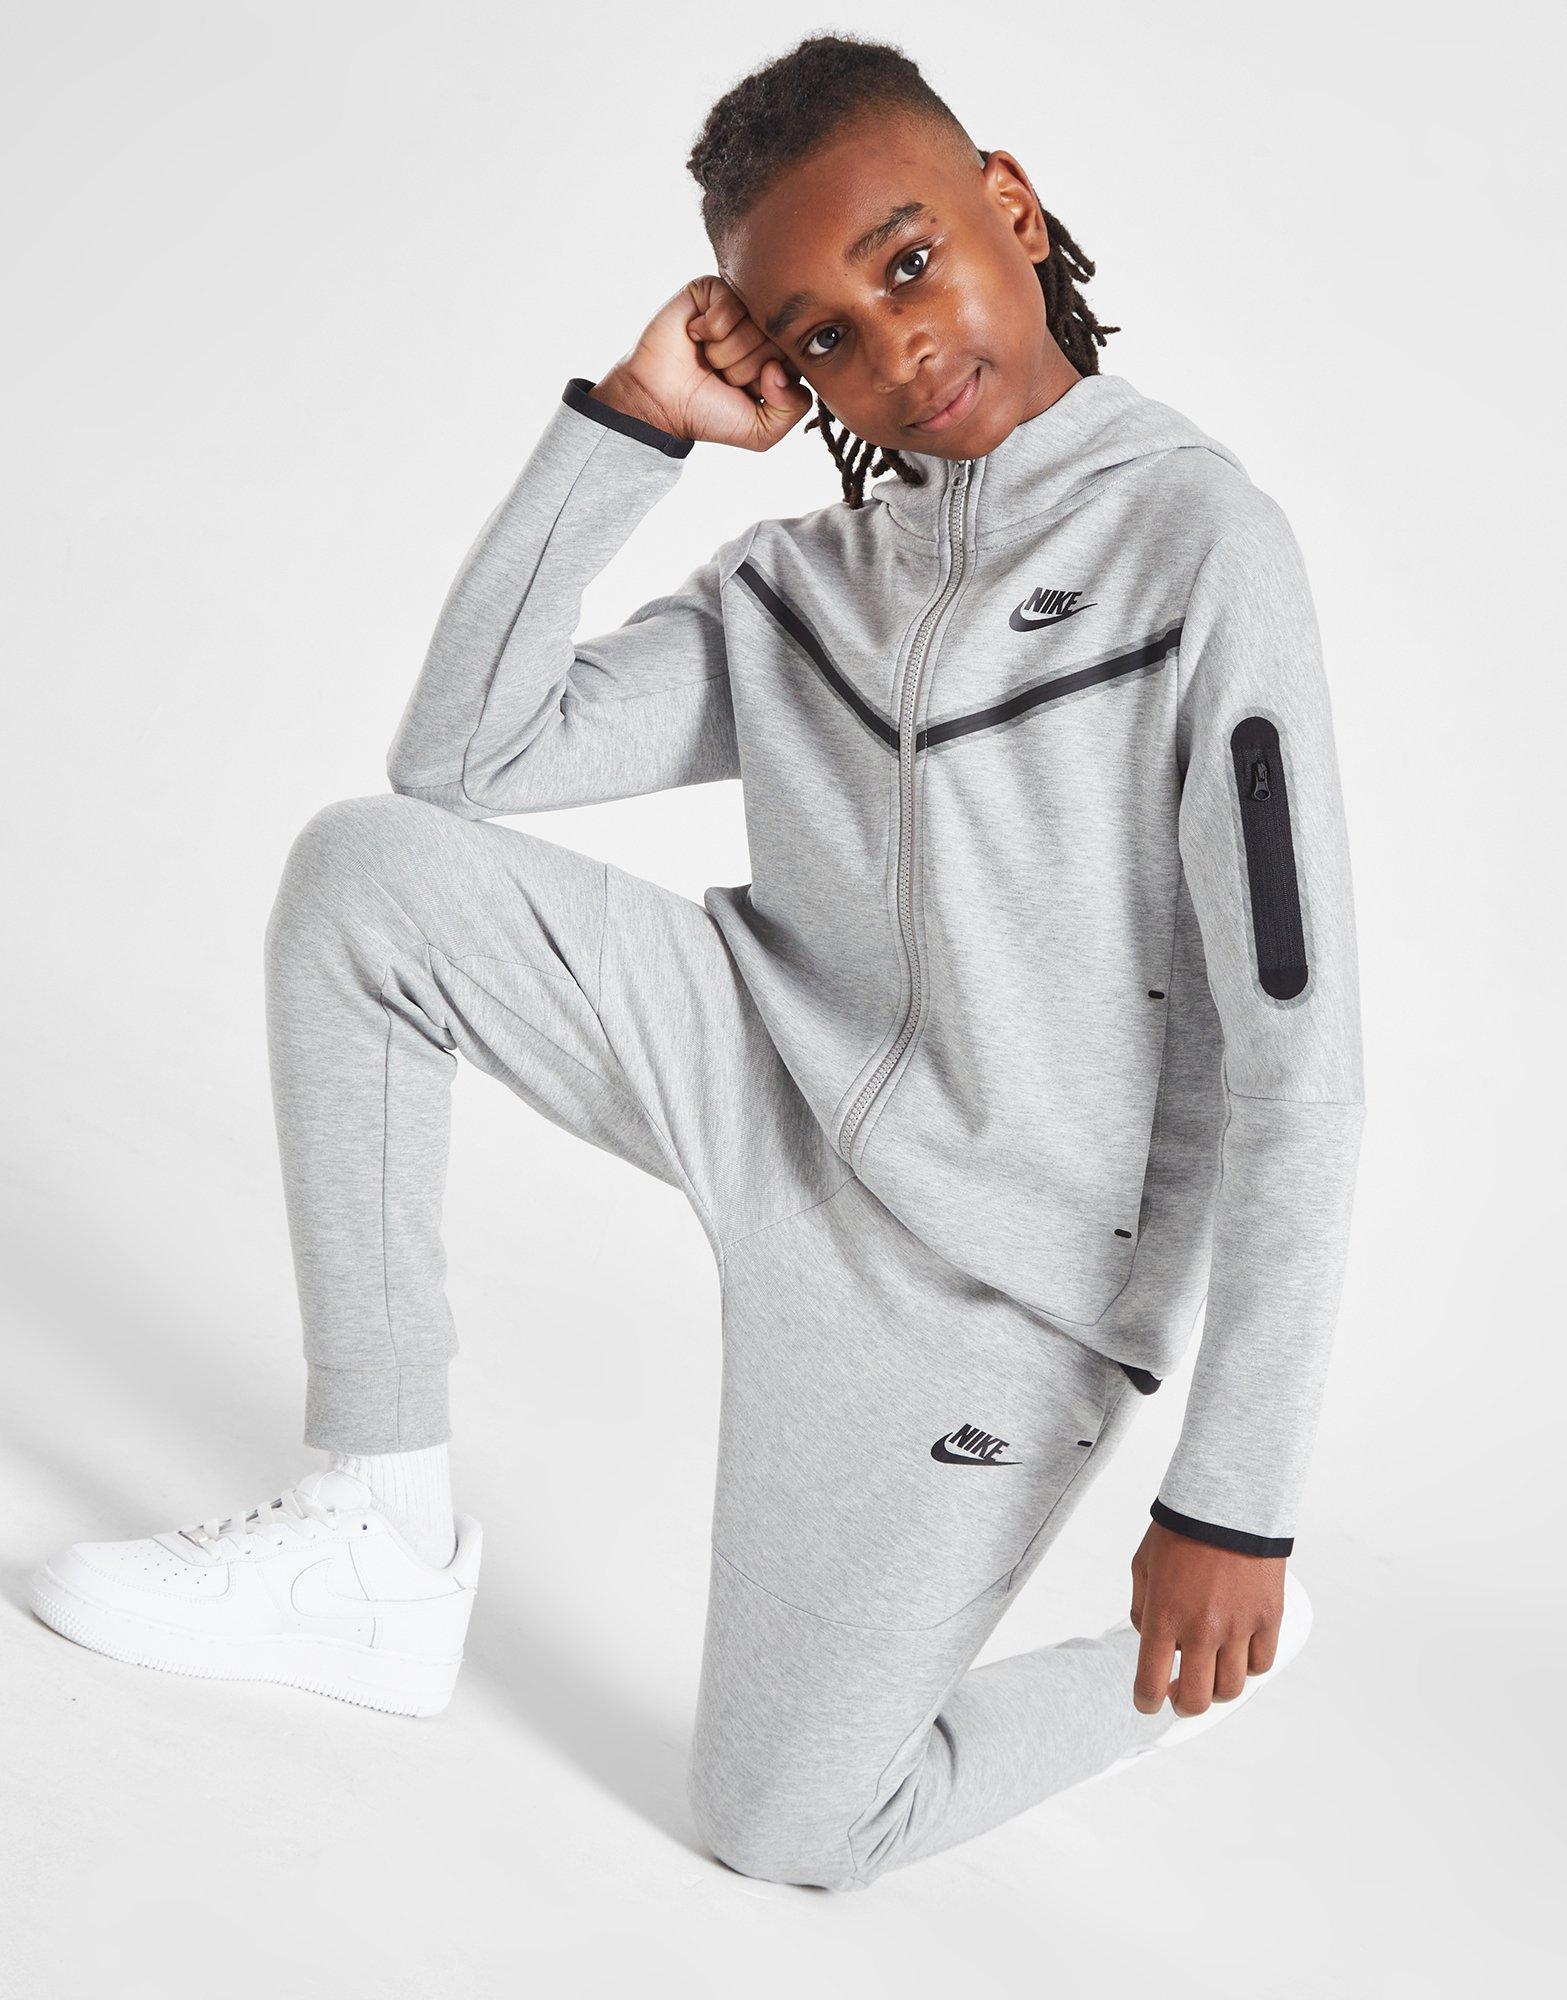 Technical Tracksuit - Ready to Wear